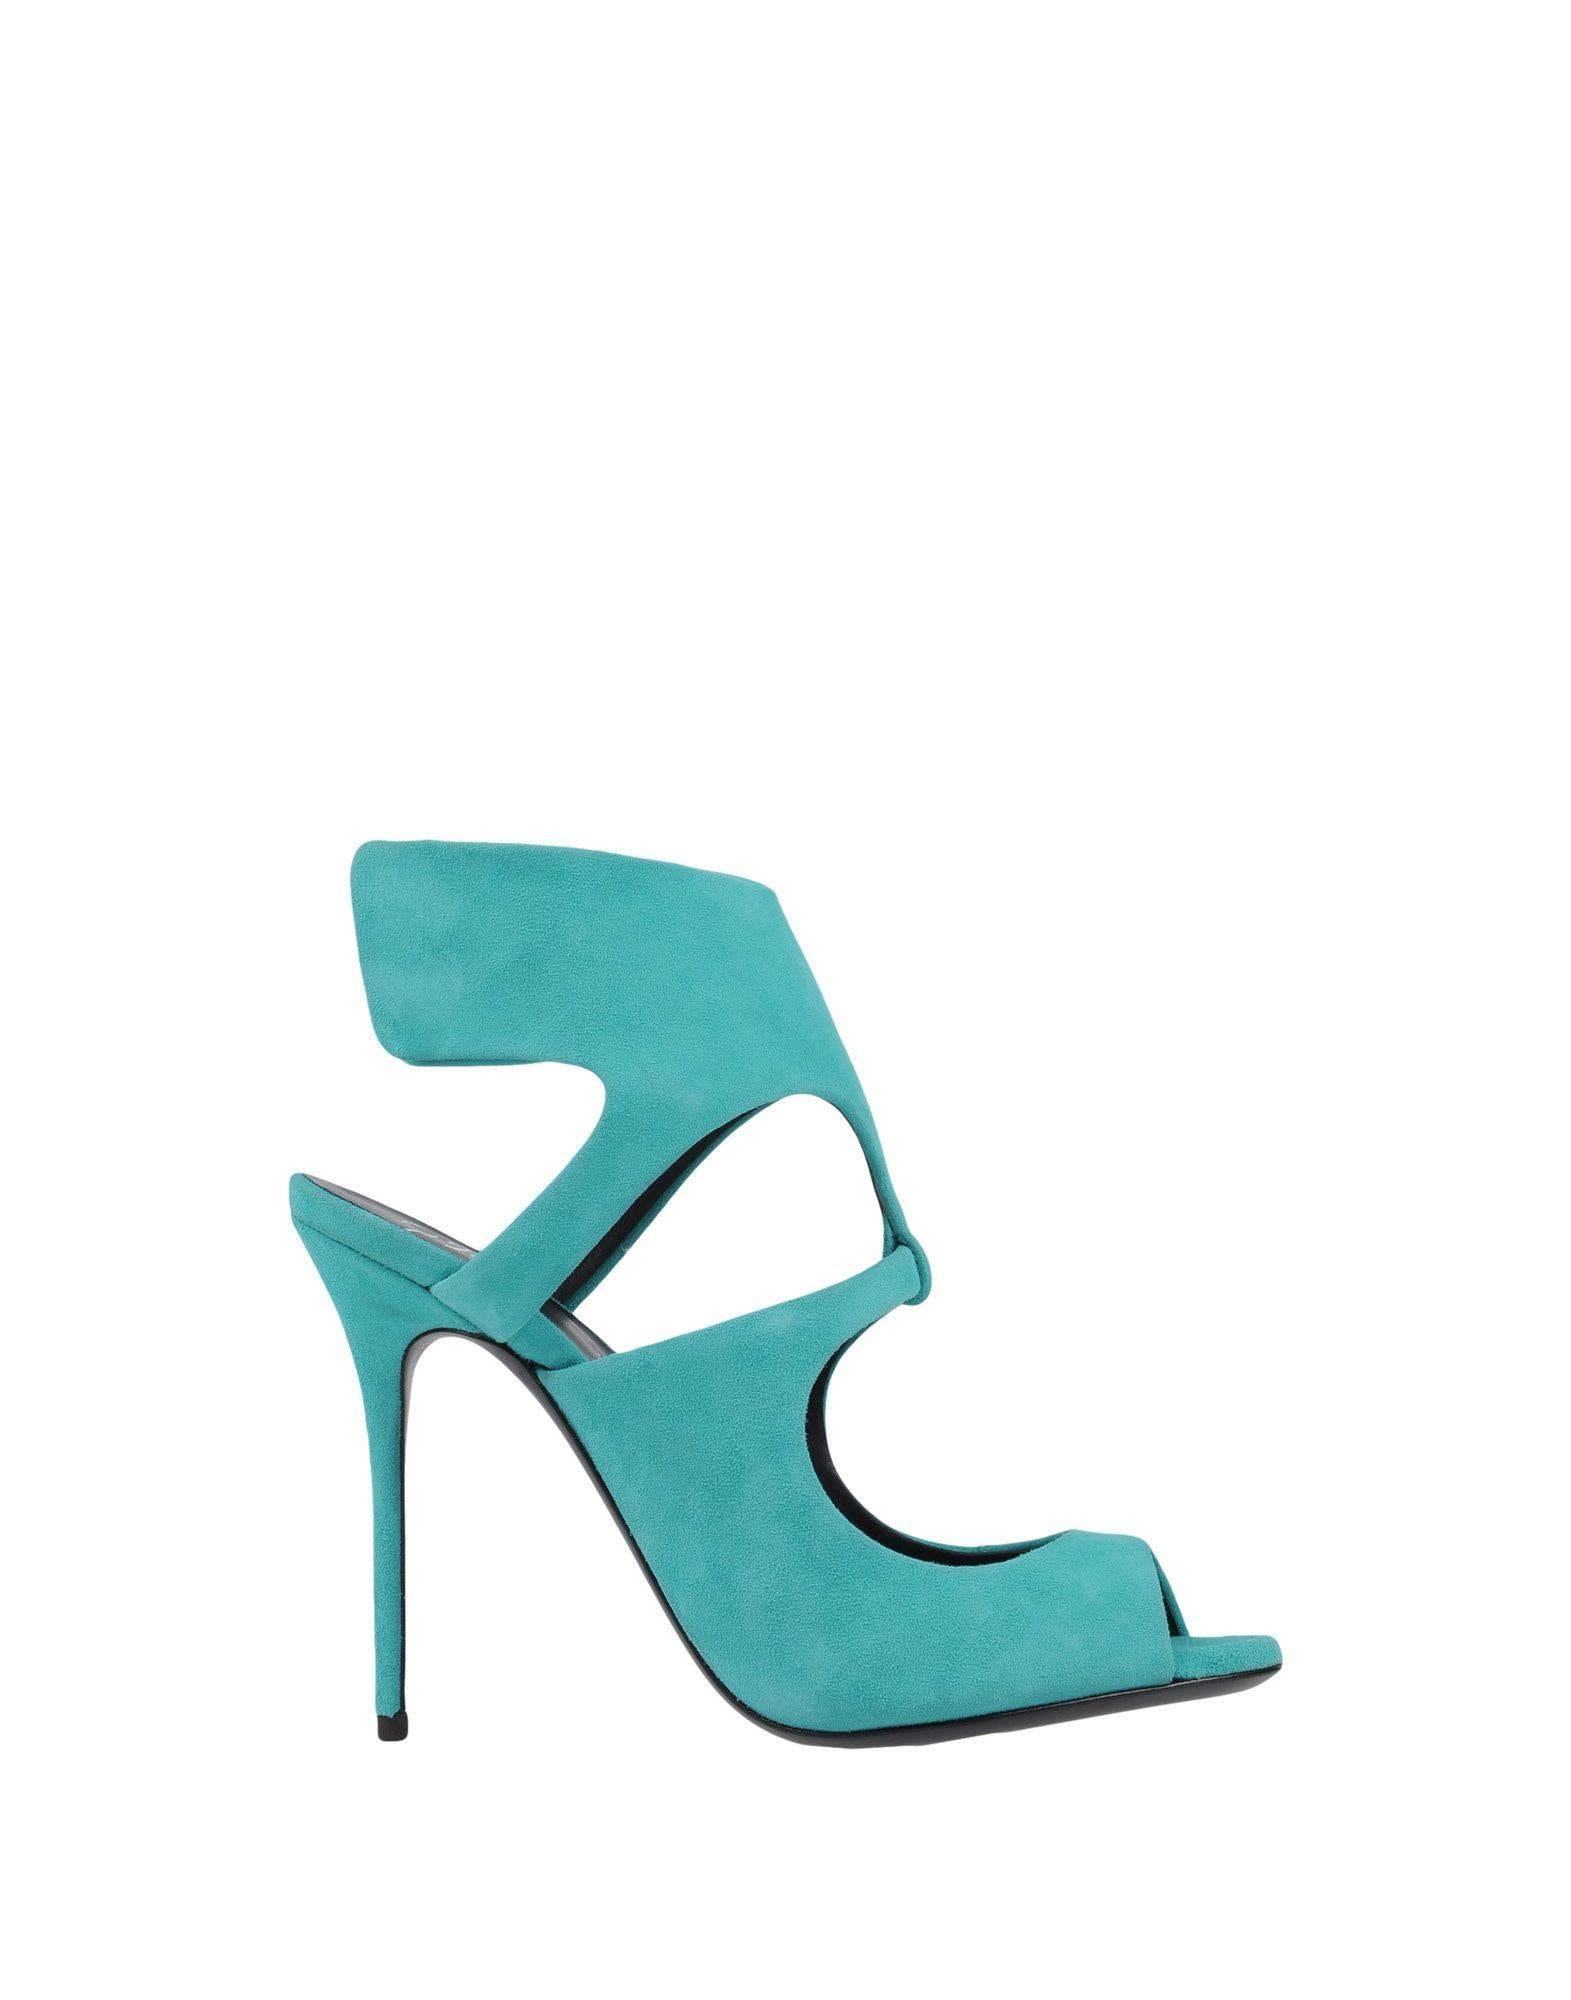 CURATOR'S NOTES

Giuseppe Zanotti New Teal Green Suede Cut Out Evening Sandals Heels in Box  

Size IT 36
Suede
Velcro closure
Made in Italy
Heel height 4.25